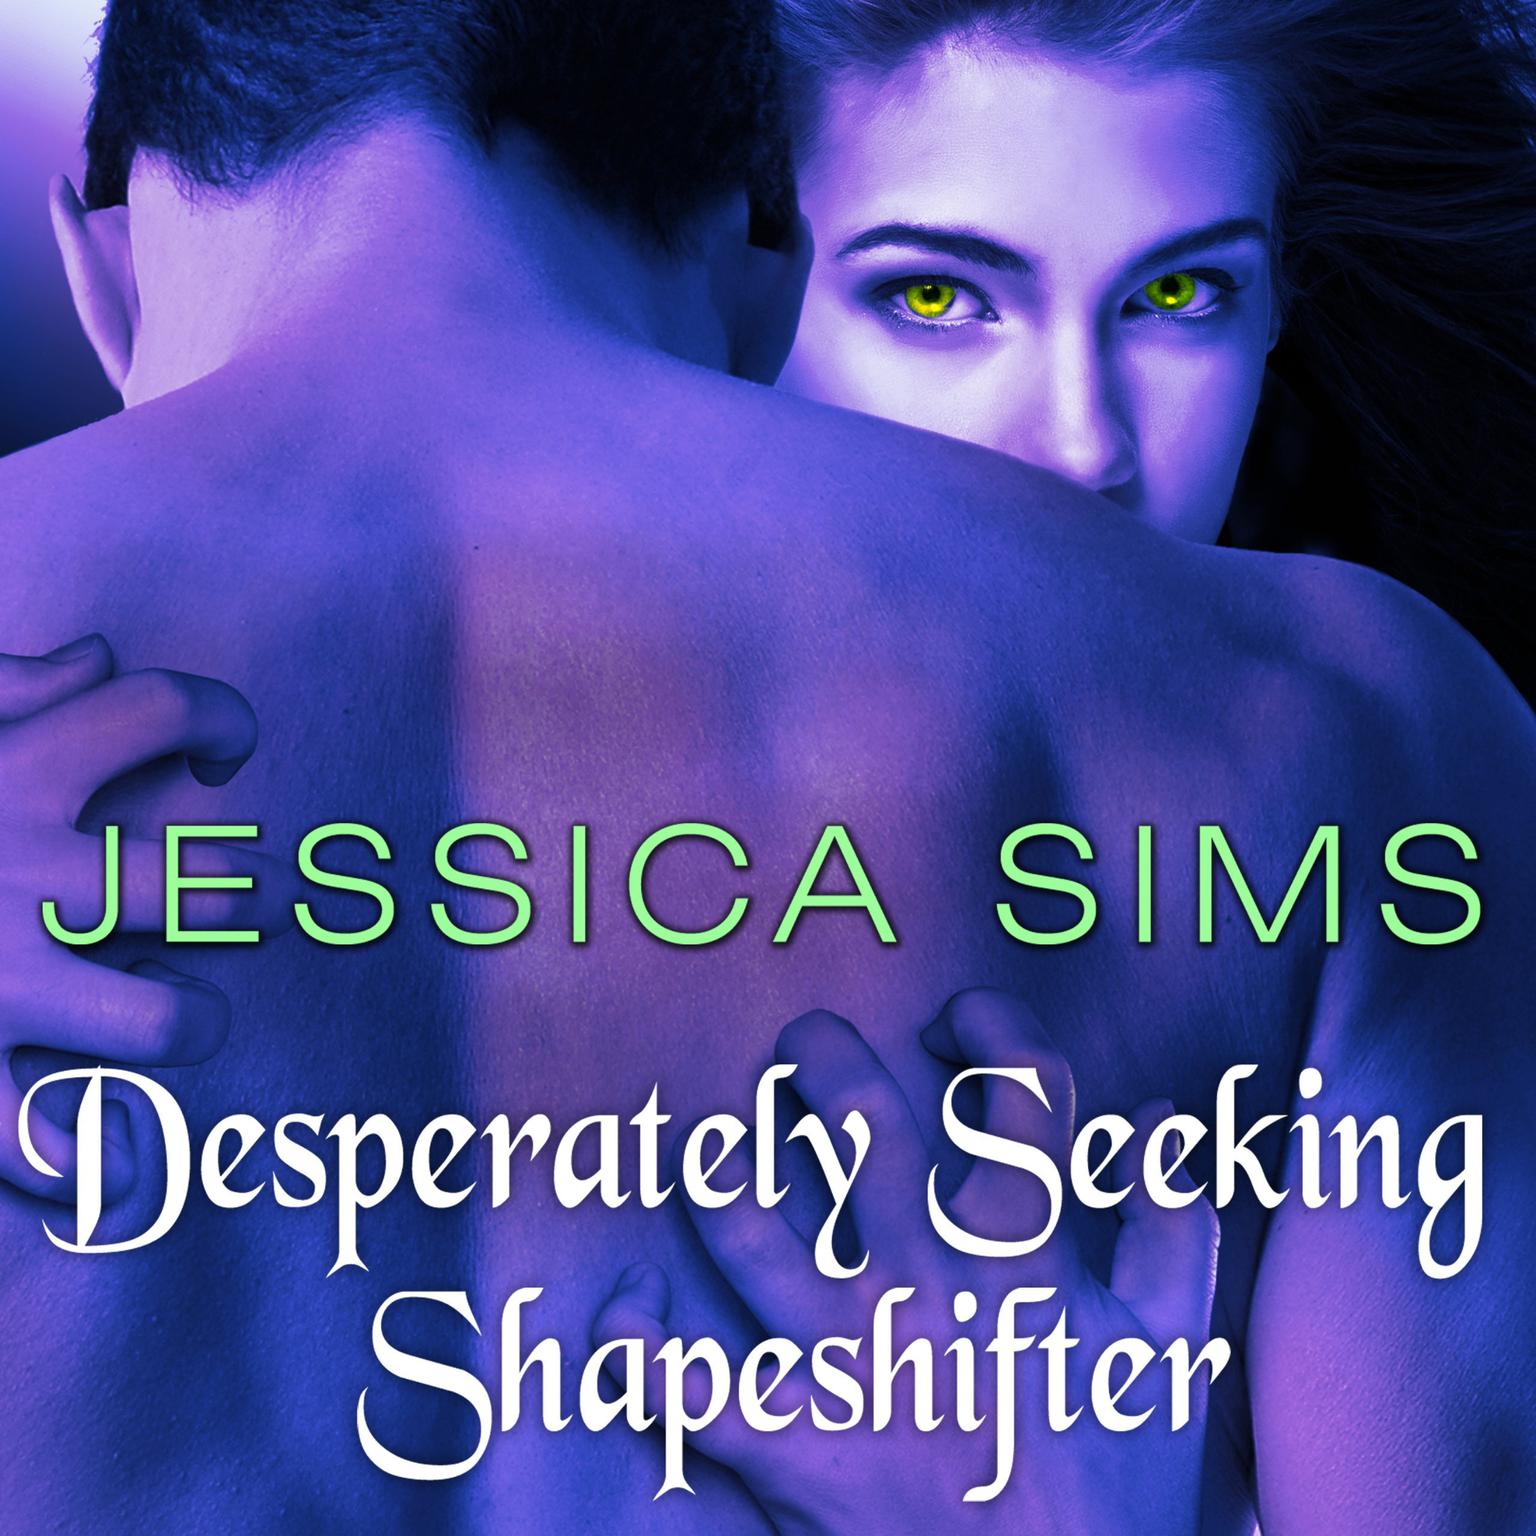 Desperately Seeking Shapeshifter Audiobook, by Jessica Sims